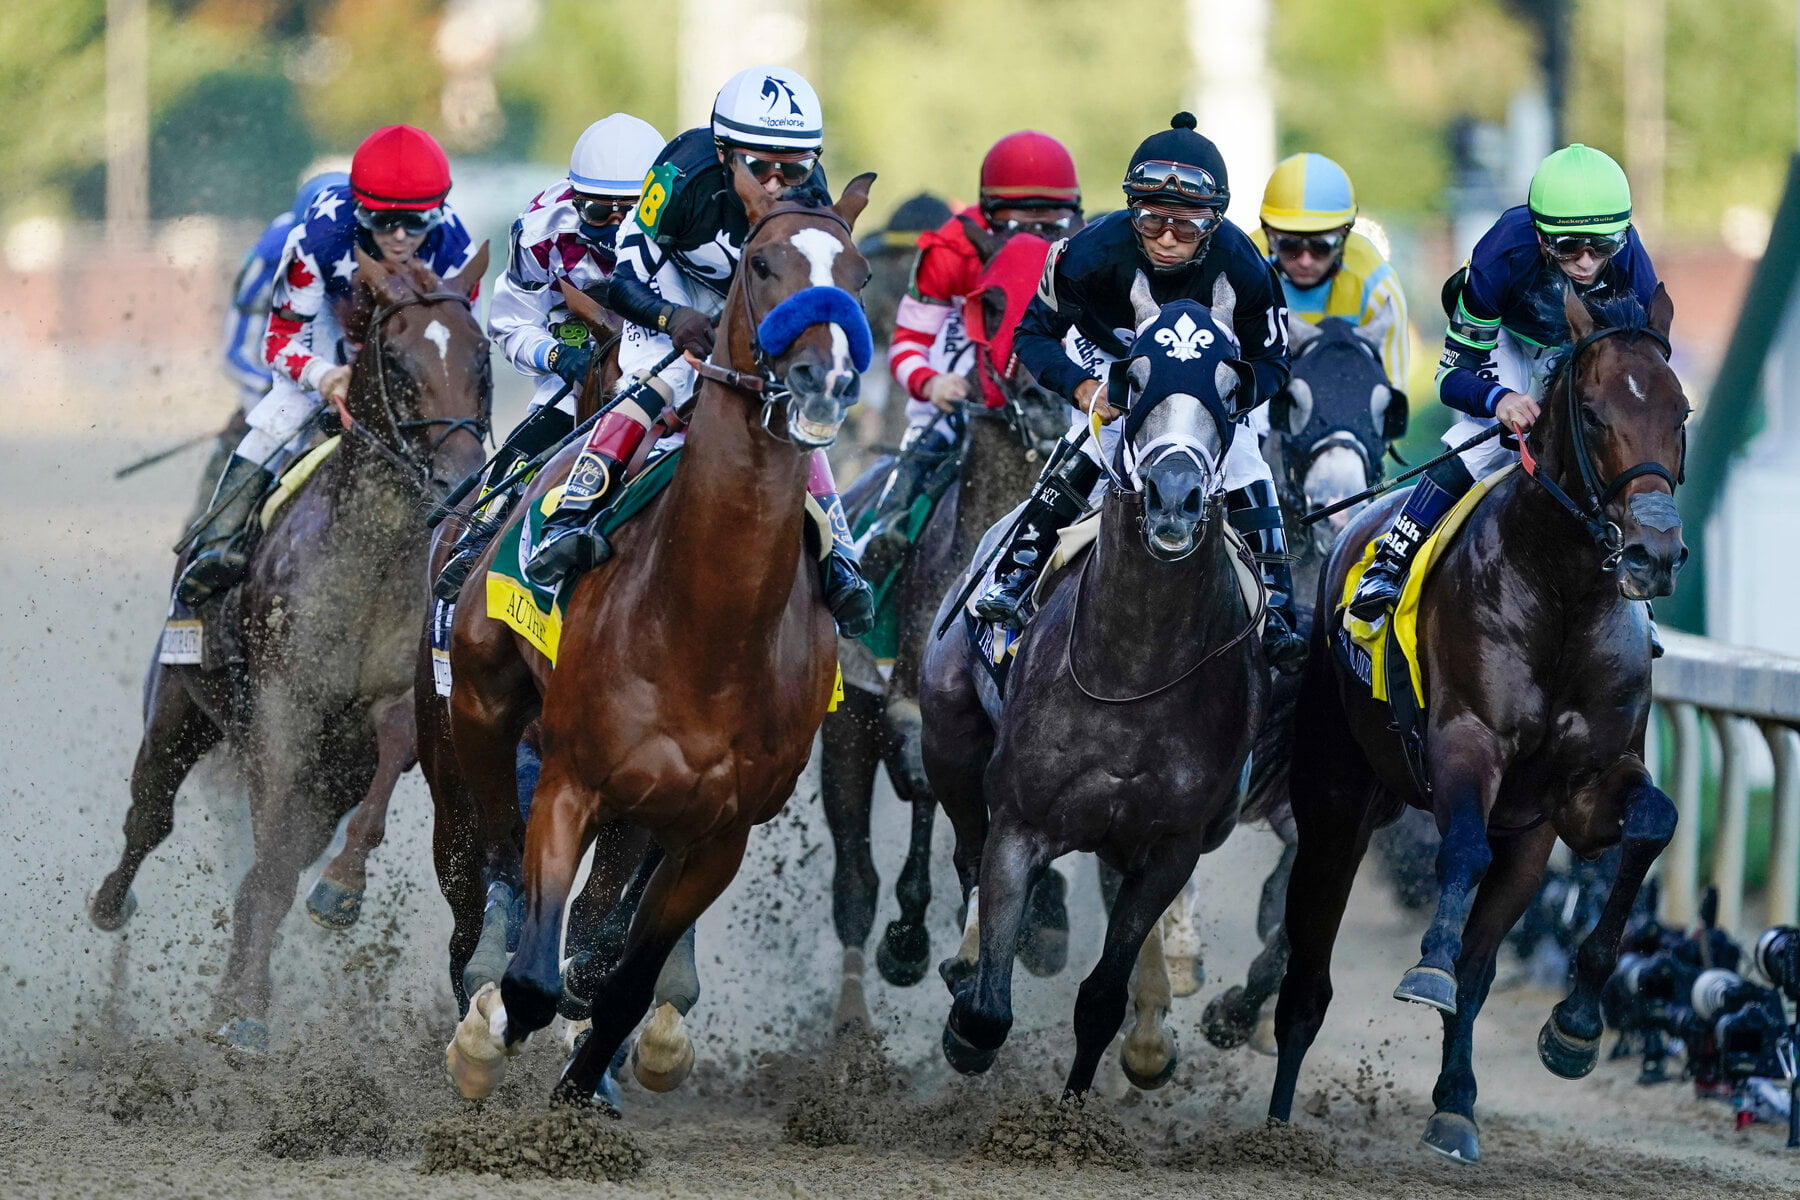 FAQs & Guide: Everything You Need To Know About The Preakness Stakes